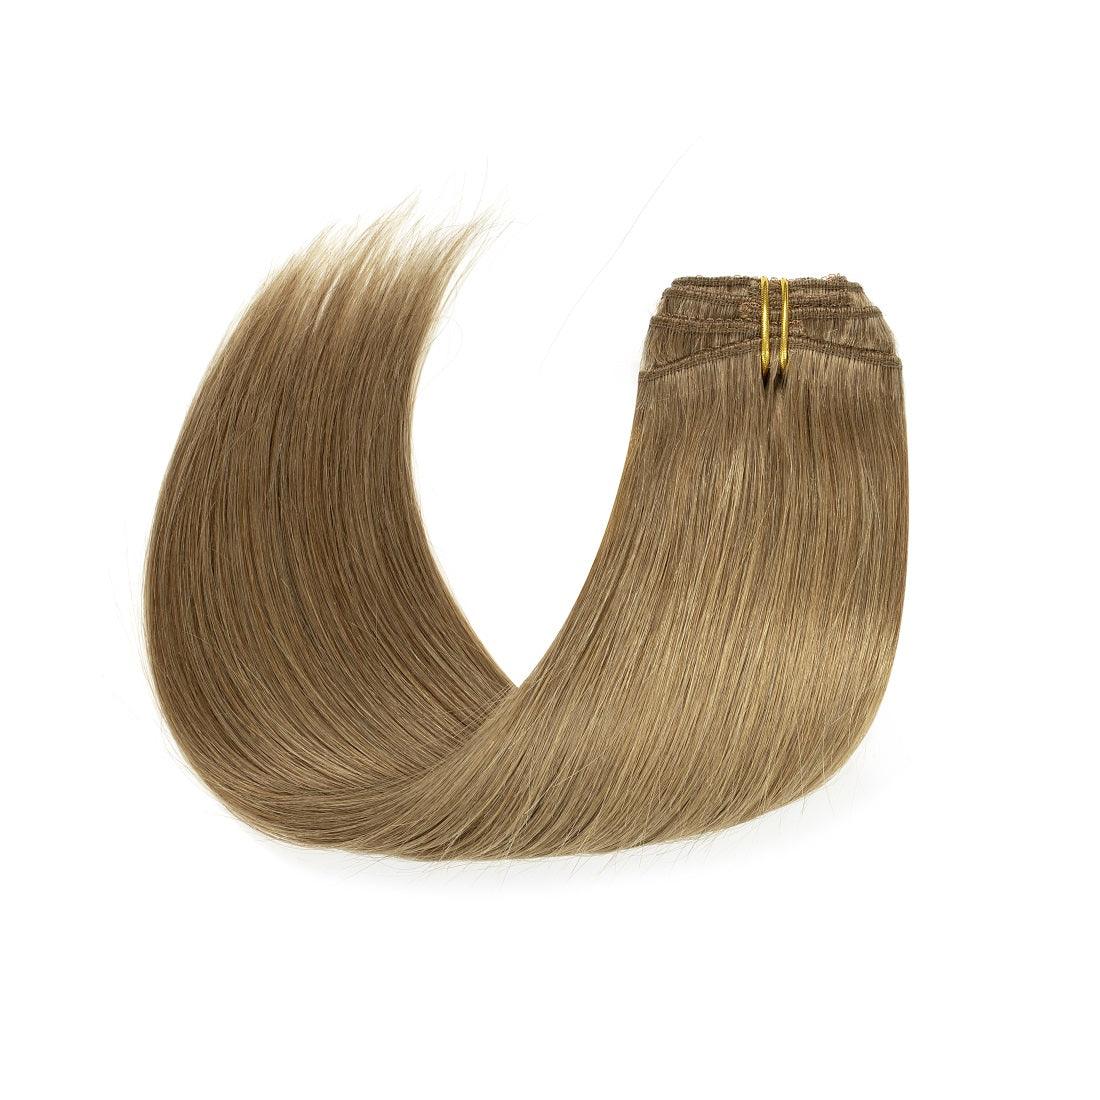 Clip in Extensions color light brown salon quality #8 - lacerhair